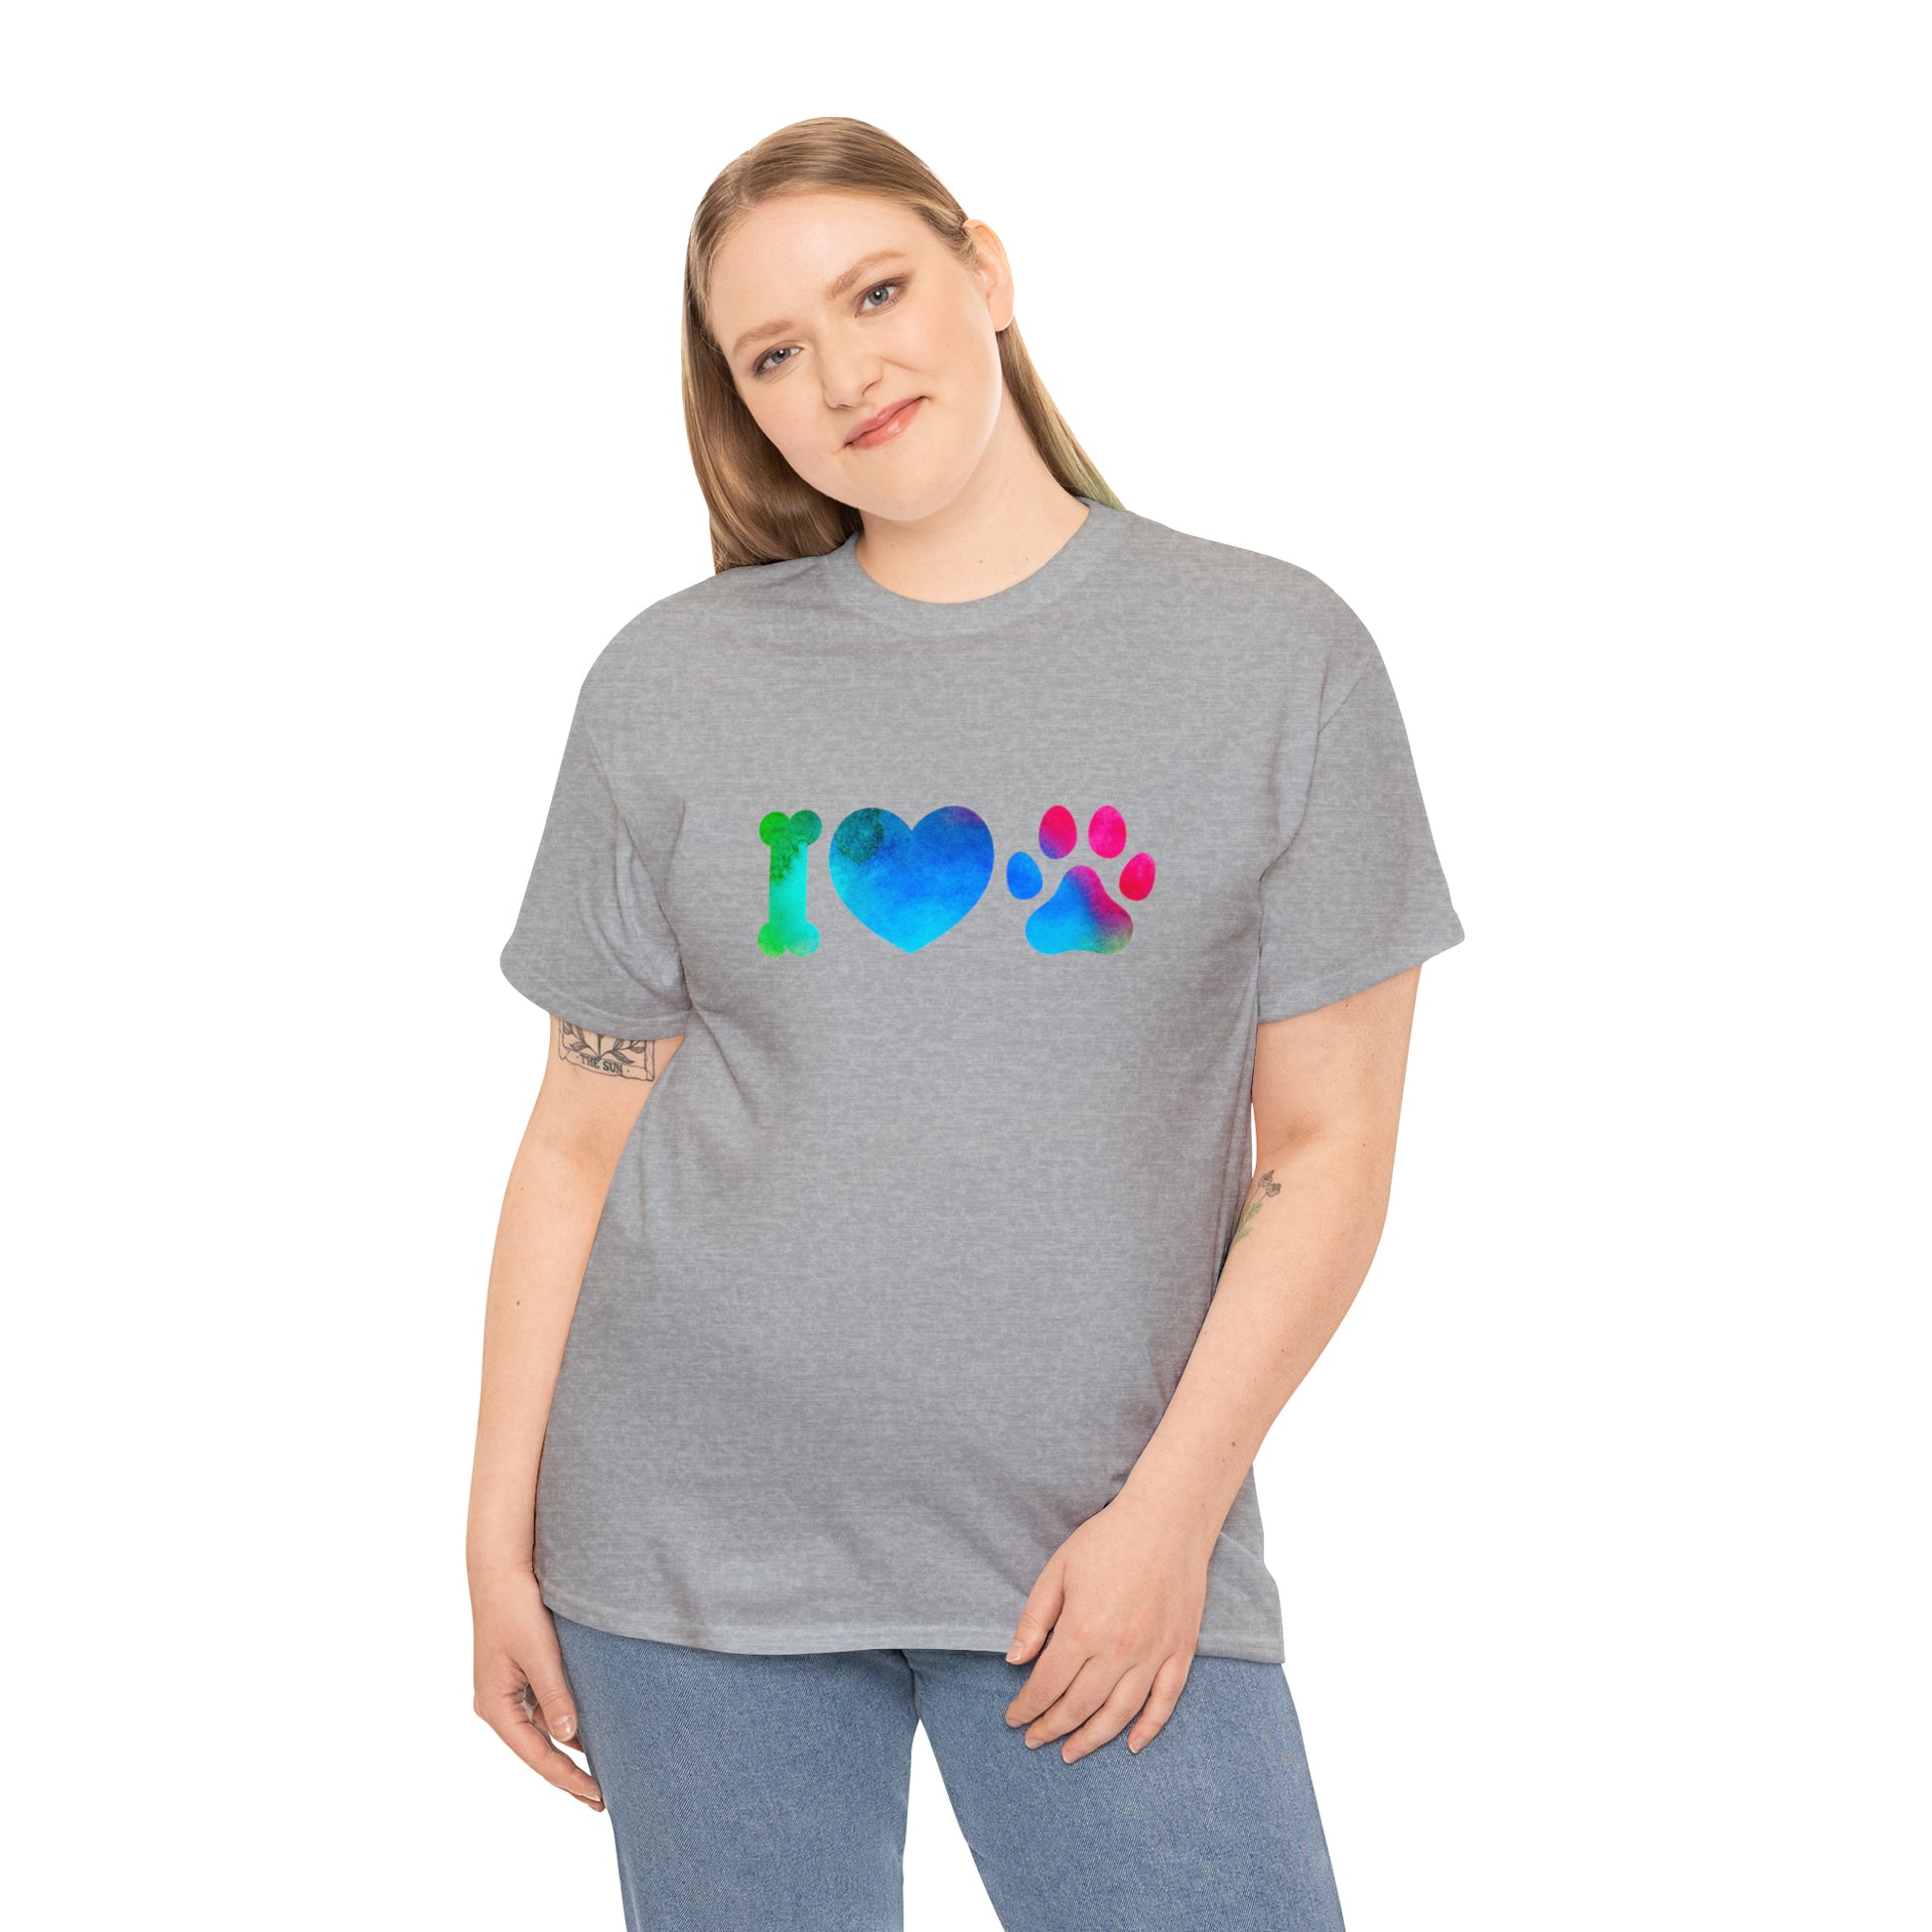 Mock up of a blonde-haired woman wearing the shirt